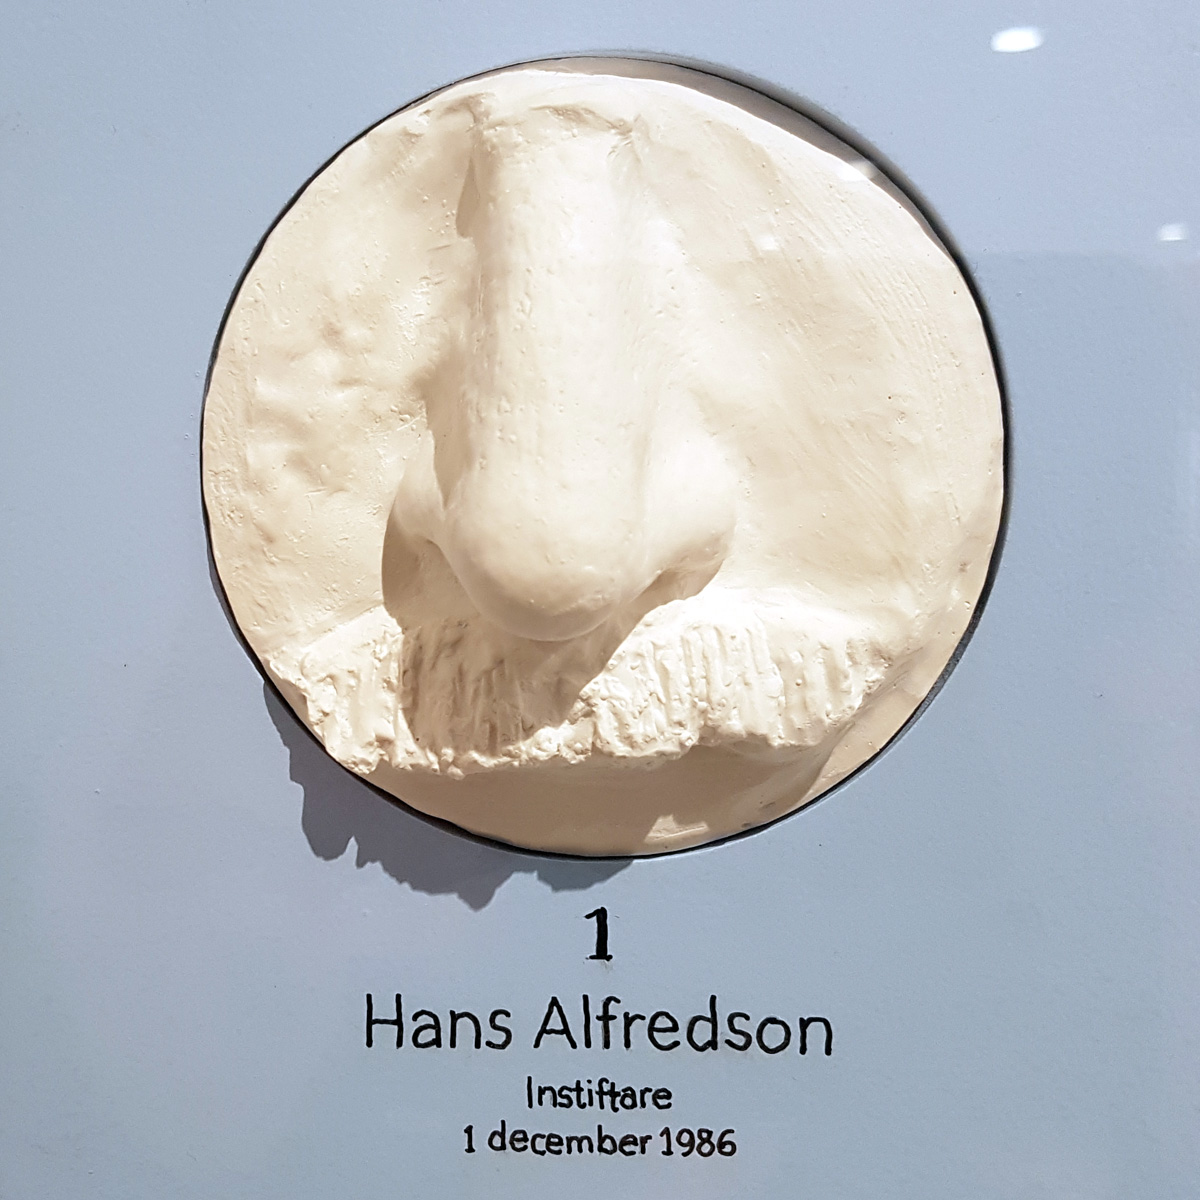 Nose number 1. A cast of Hans Alfredsson’s nose in the Nosoteque in Lund